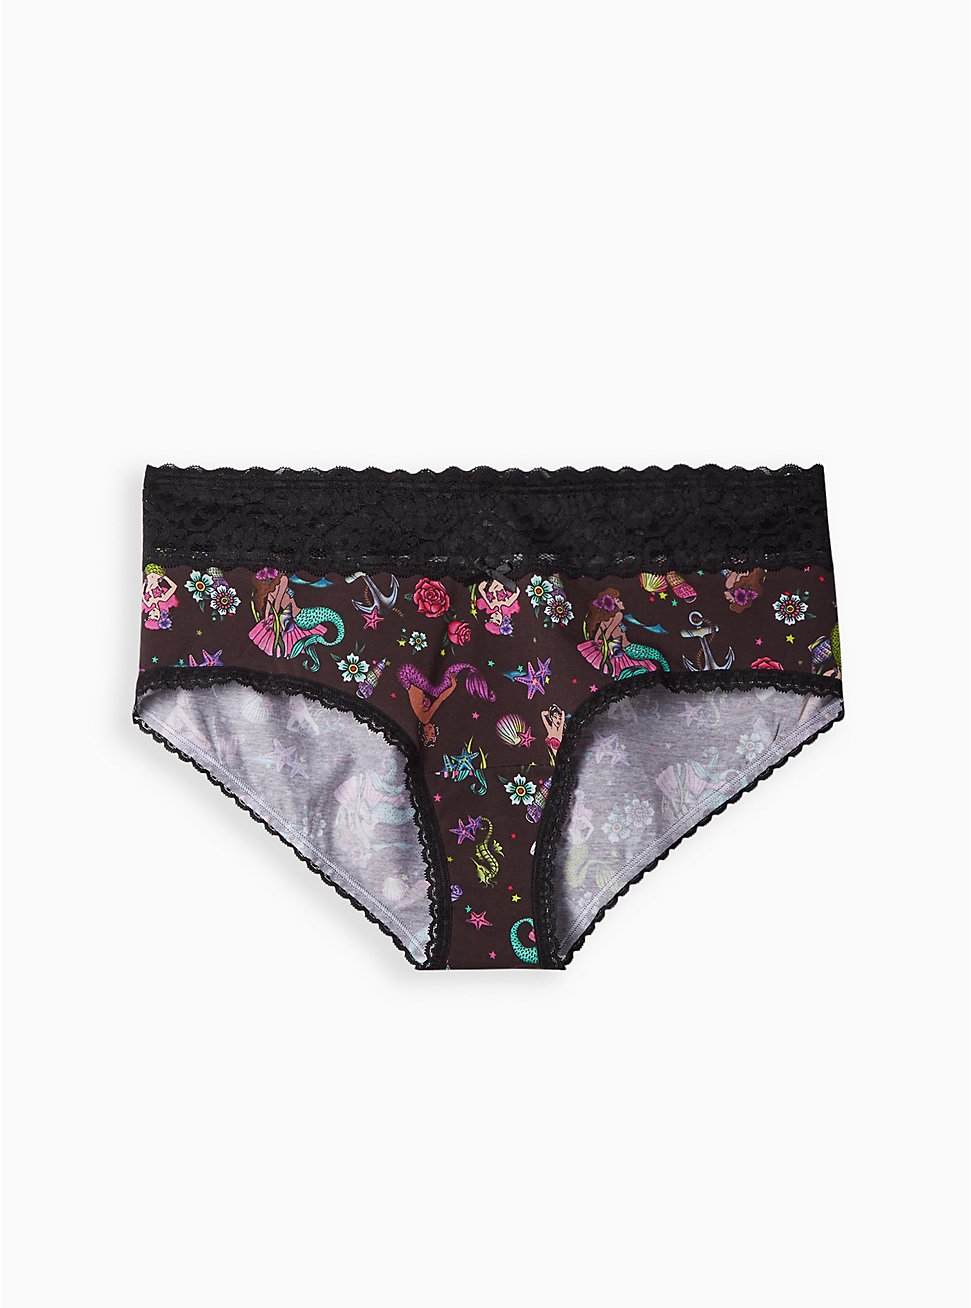 Cotton Mid-Rise Cheeky Lace Trim Panty, SPACED MERMAID TAT BLACK, hi-res